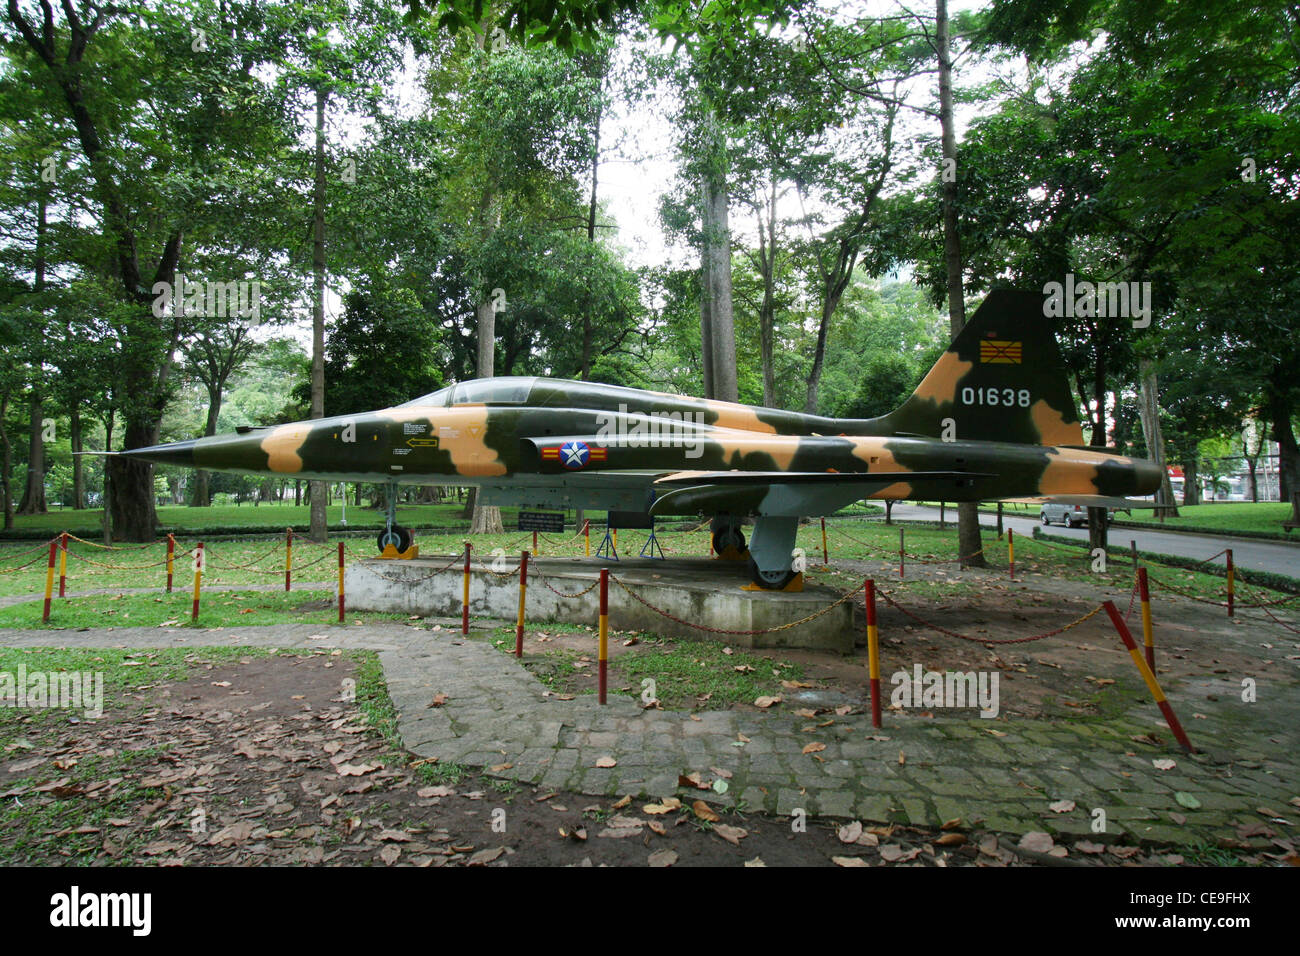 South Vietnam Air Force F-5 fighter jet on display near the Reunification Palace in Ho Chi Minh city, Vietnam Stock Photo